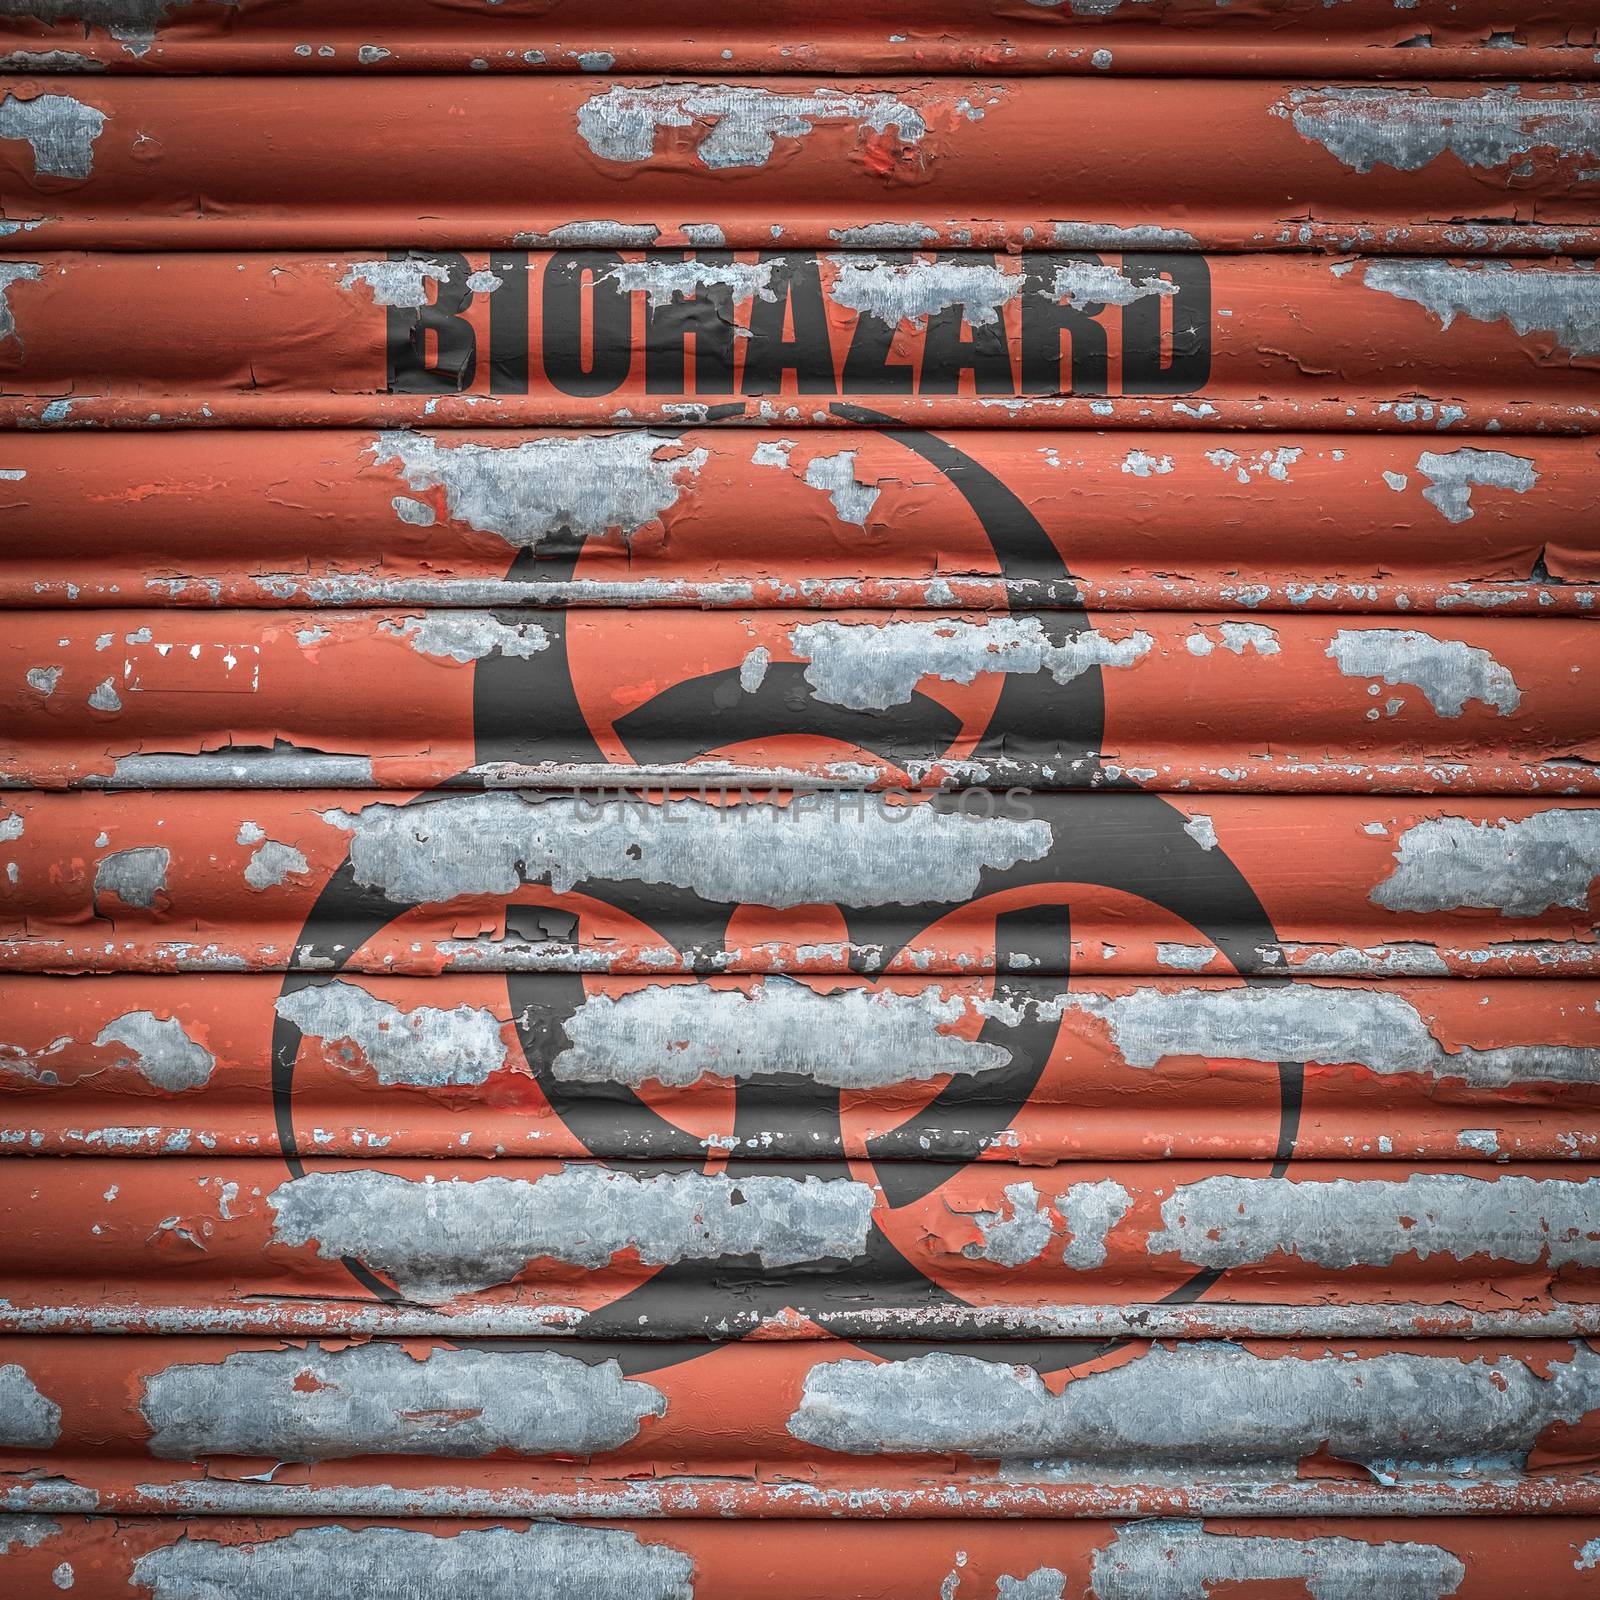 Grungy Metal Shutters With A Scary Biohazard Sign At A Laboratory